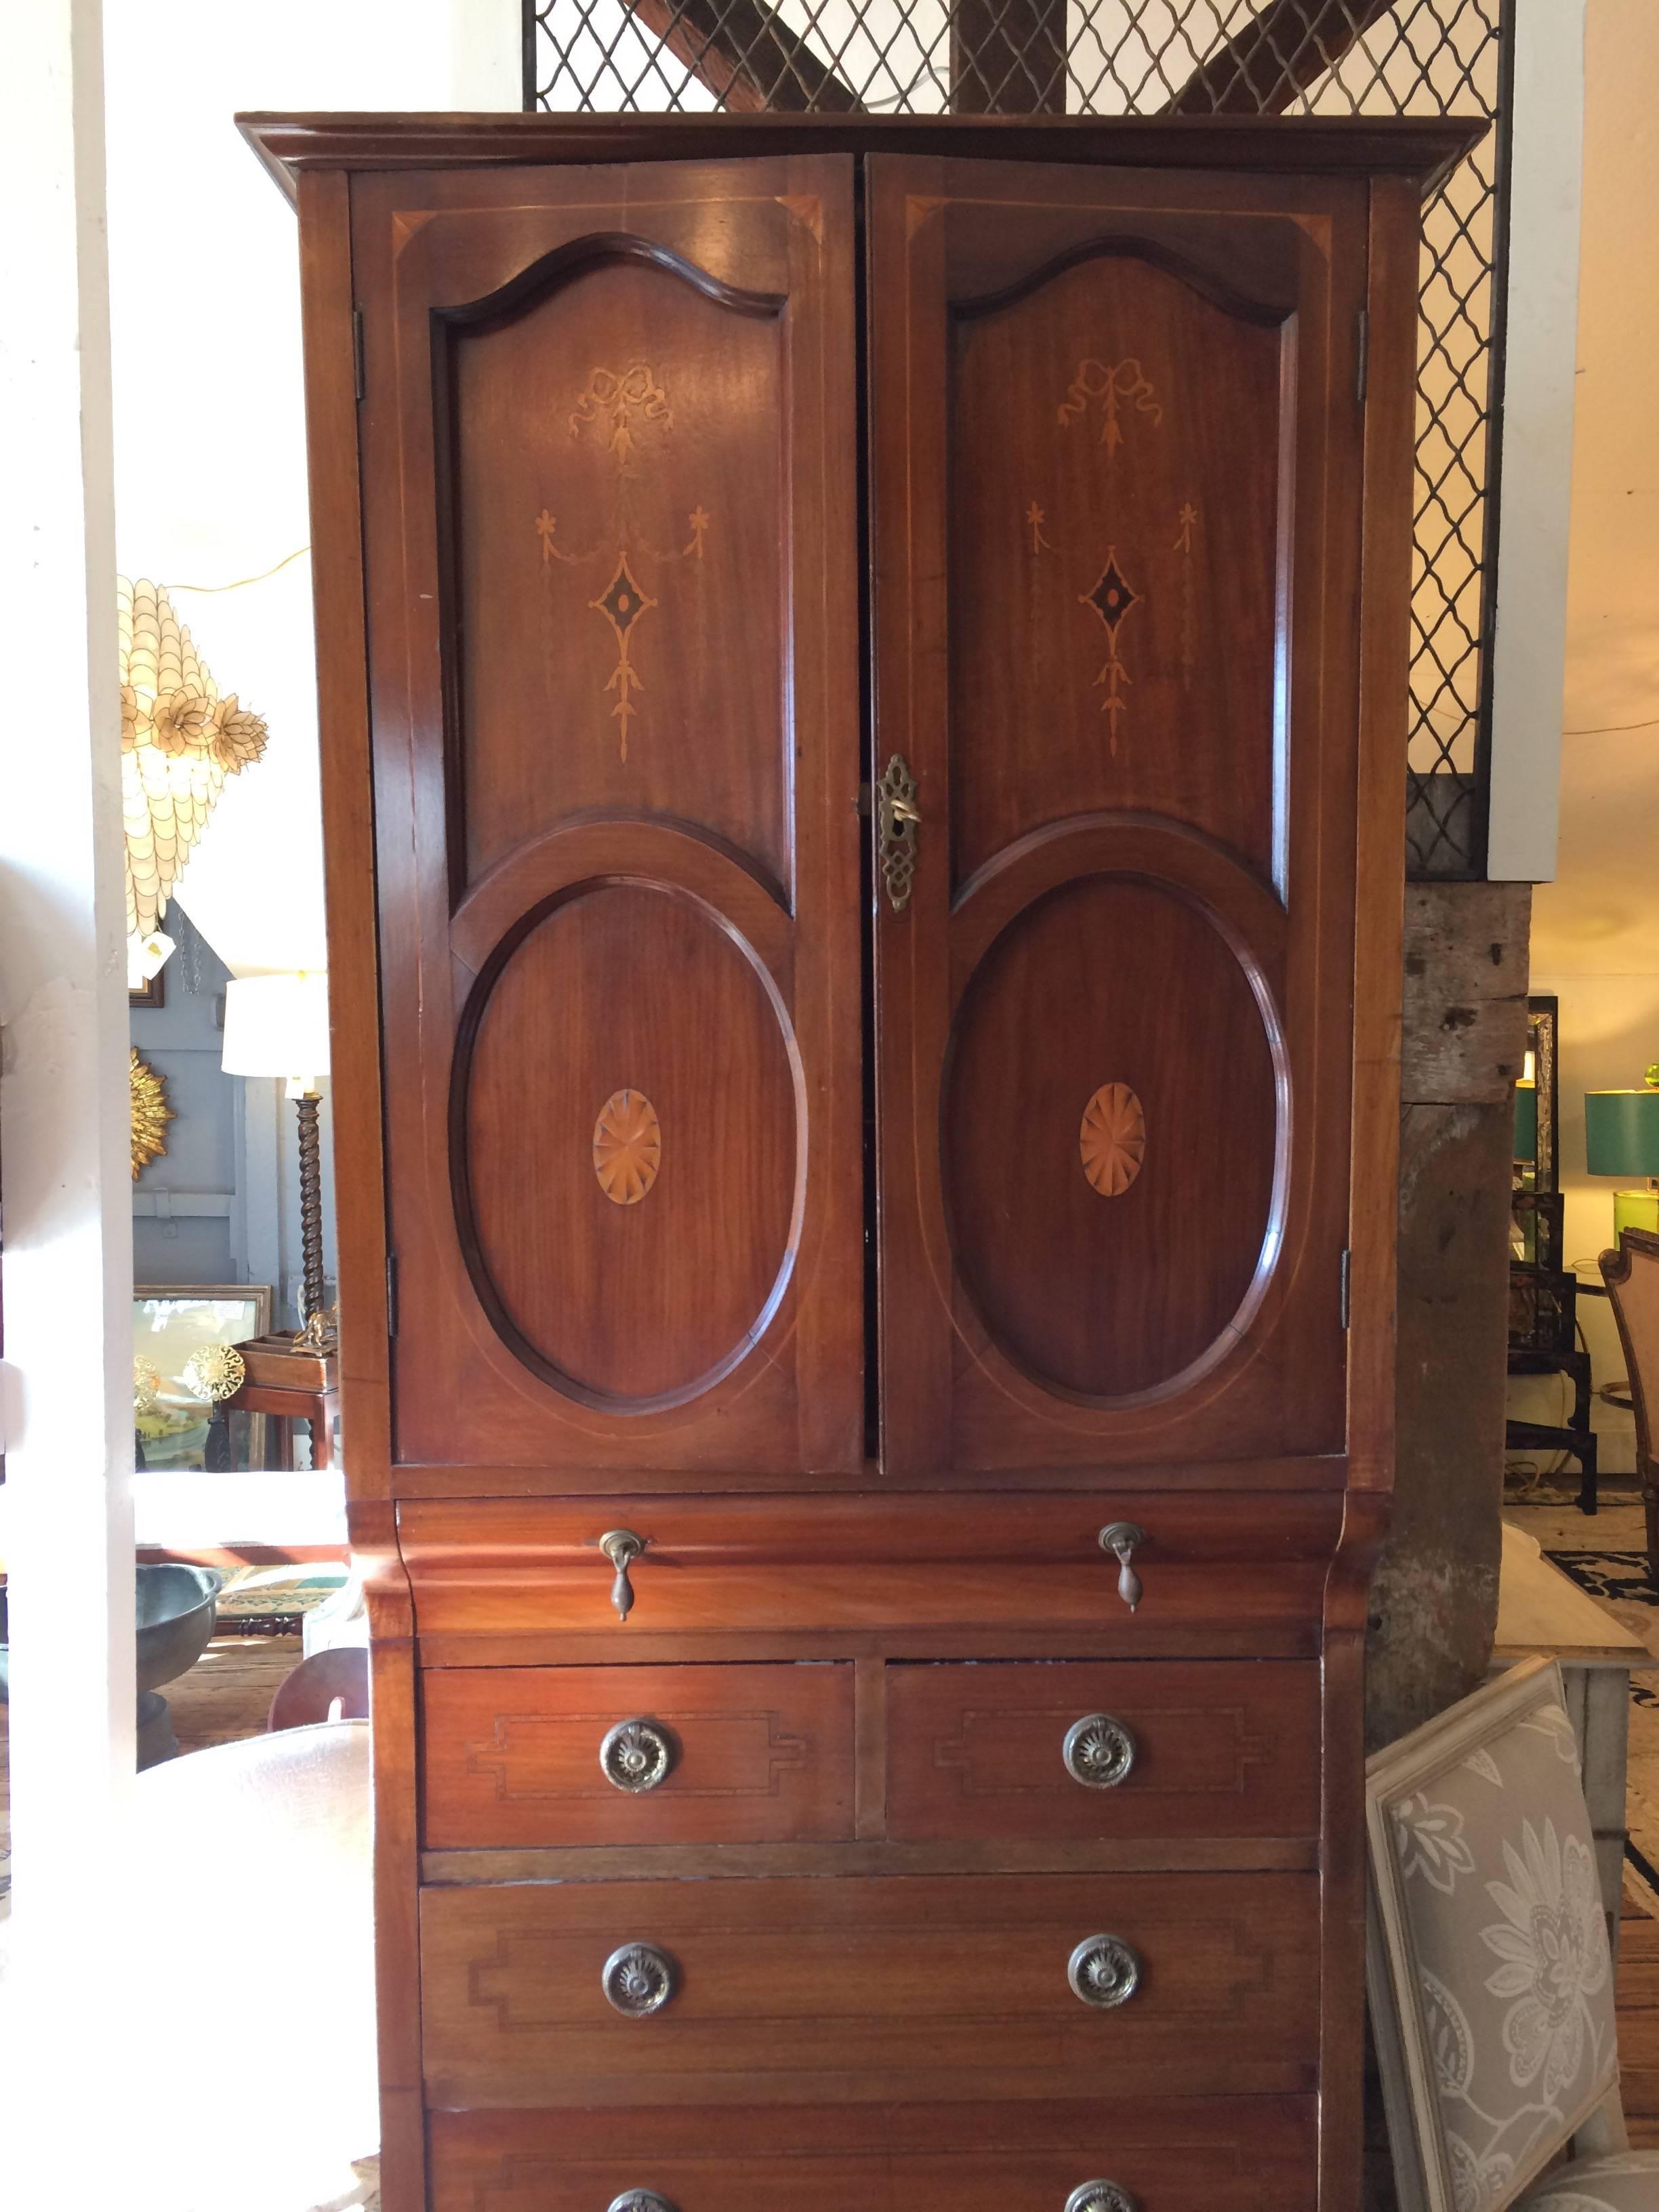 English antique tall cabinet/linen press in mahogany with string inlay. Doors open over a 1.5 inch drawer, one split set of drawers, and four single drawers. All hardware is original and door to cabinet locks with a key. Detailed string inlay on